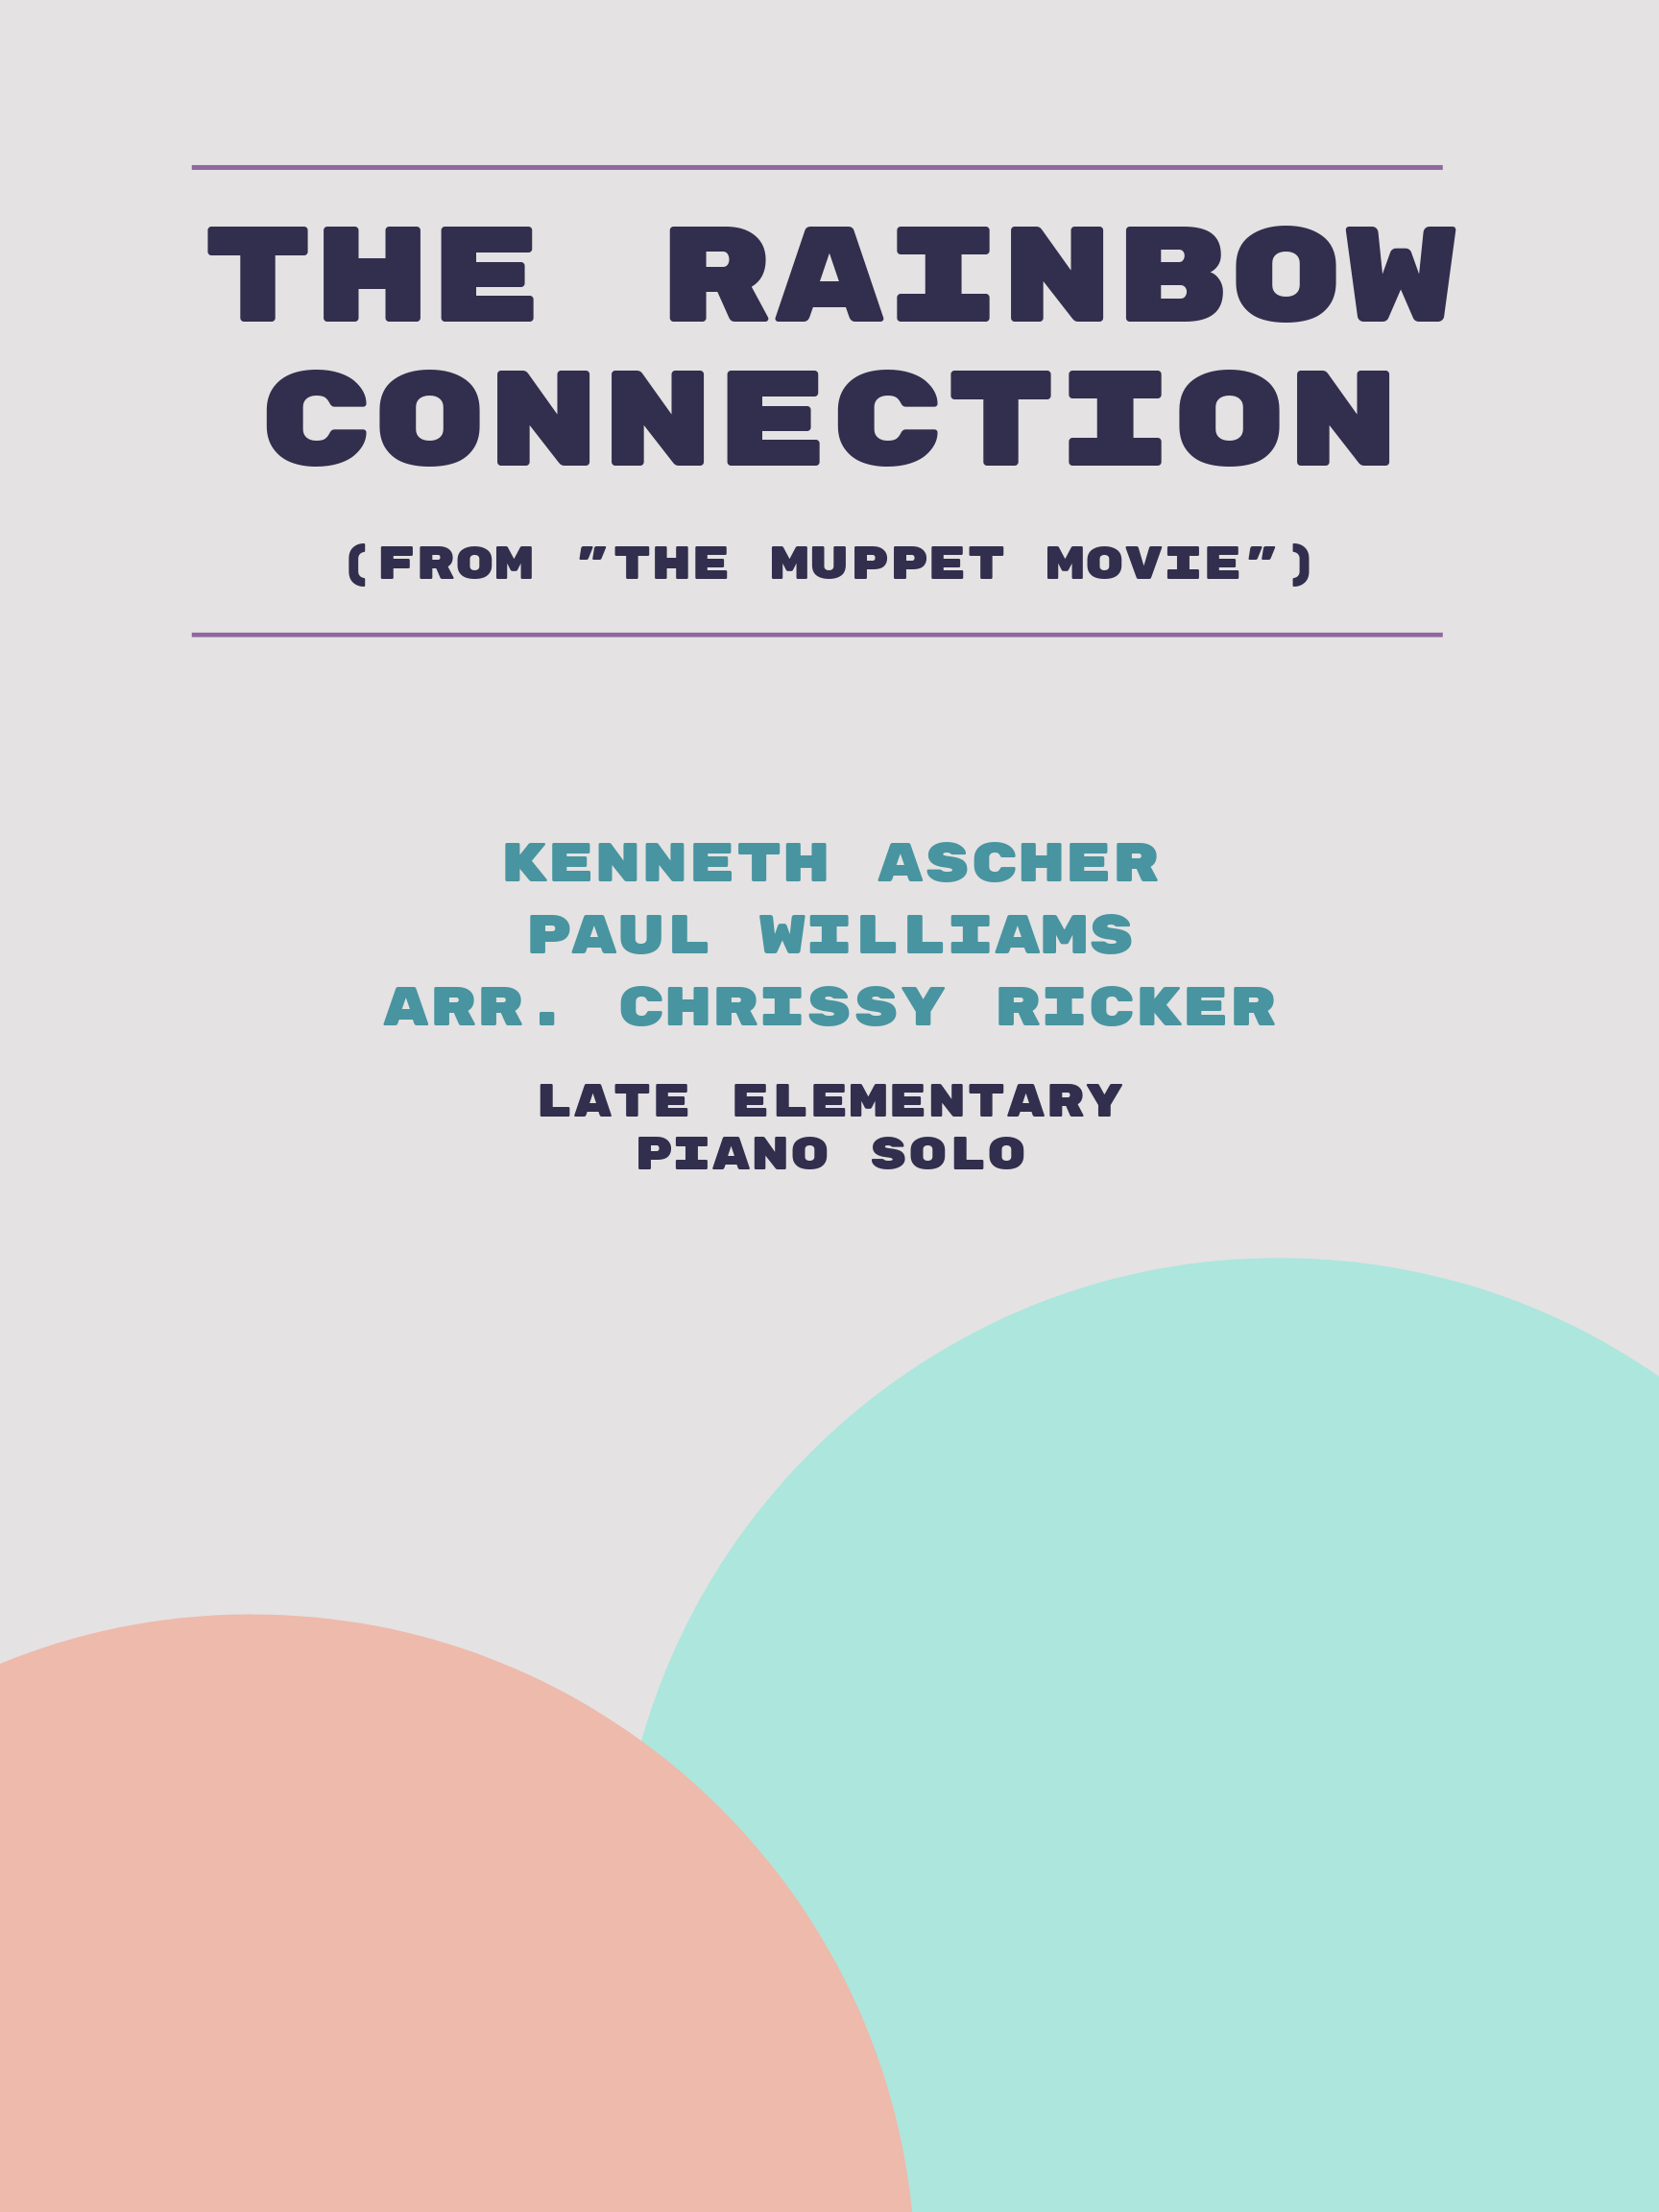 The Rainbow Connection by Kenneth Ascher, Paul Williams